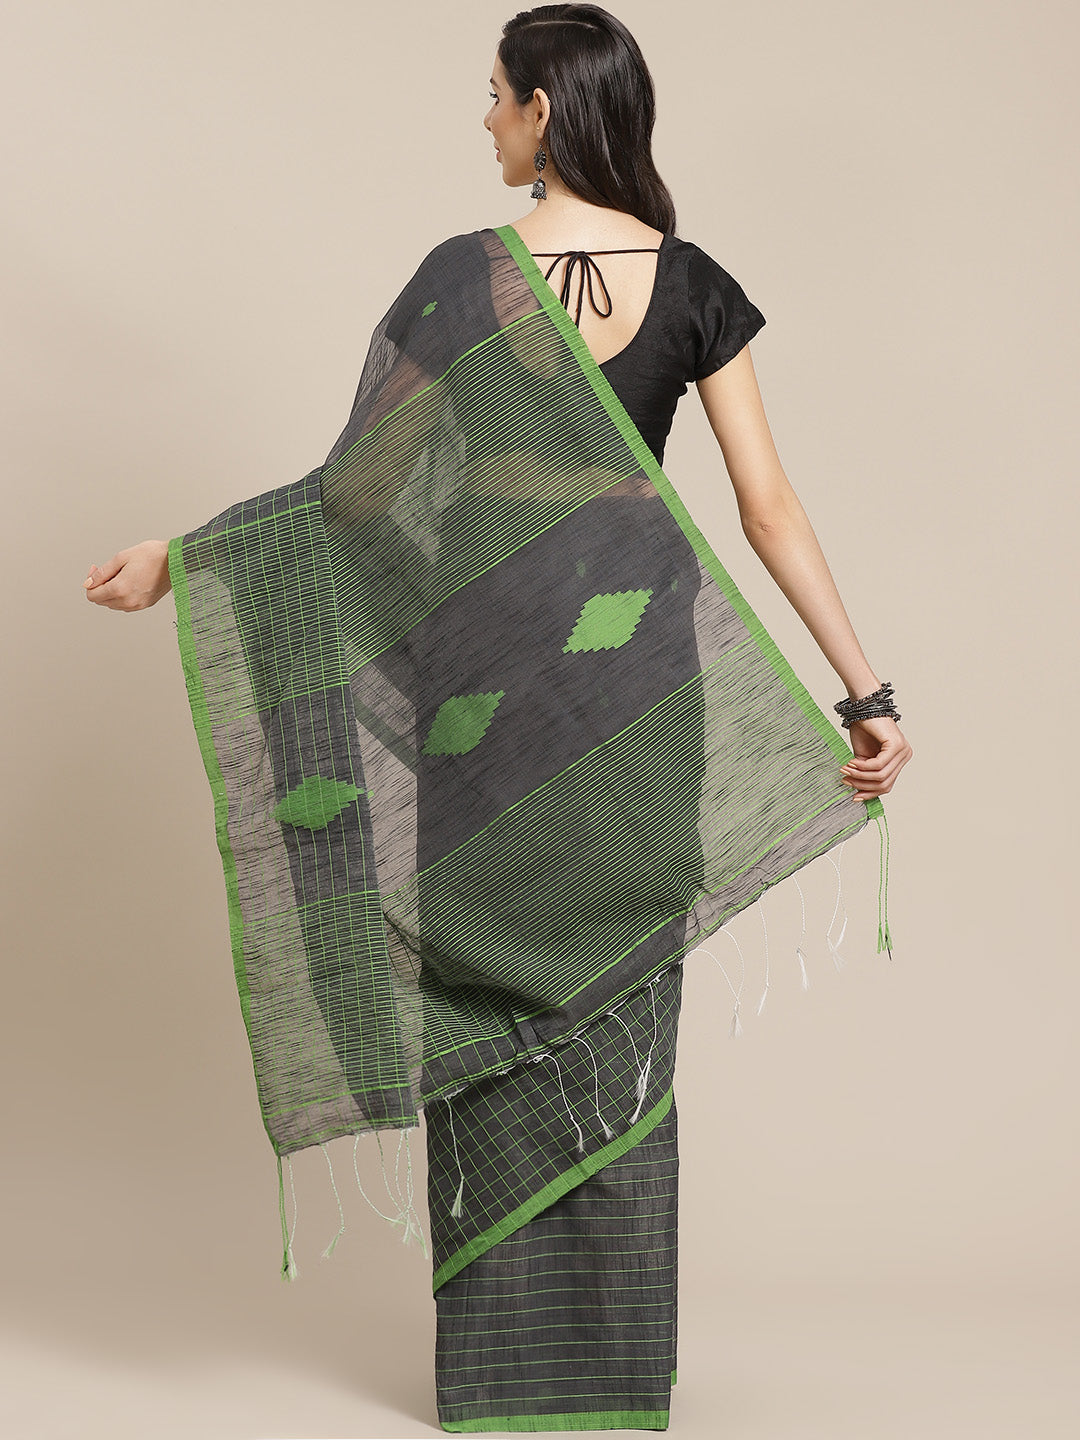 Grey and Green, Kalakari India Ikat Silk Cotton Woven Design Saree with Blouse SHBESA0033-Saree-Kalakari India-SHBESA0033-Bengal, Cotton, Geographical Indication, Hand Crafted, Heritage Prints, Ikkat, Natural Dyes, Red, Sarees, Sustainable Fabrics, Woven, Yellow-[Linen,Ethnic,wear,Fashionista,Handloom,Handicraft,Indigo,blockprint,block,print,Cotton,Chanderi,Blue, latest,classy,party,bollywood,trendy,summer,style,traditional,formal,elegant,unique,style,hand,block,print, dabu,booti,gift,present,gl